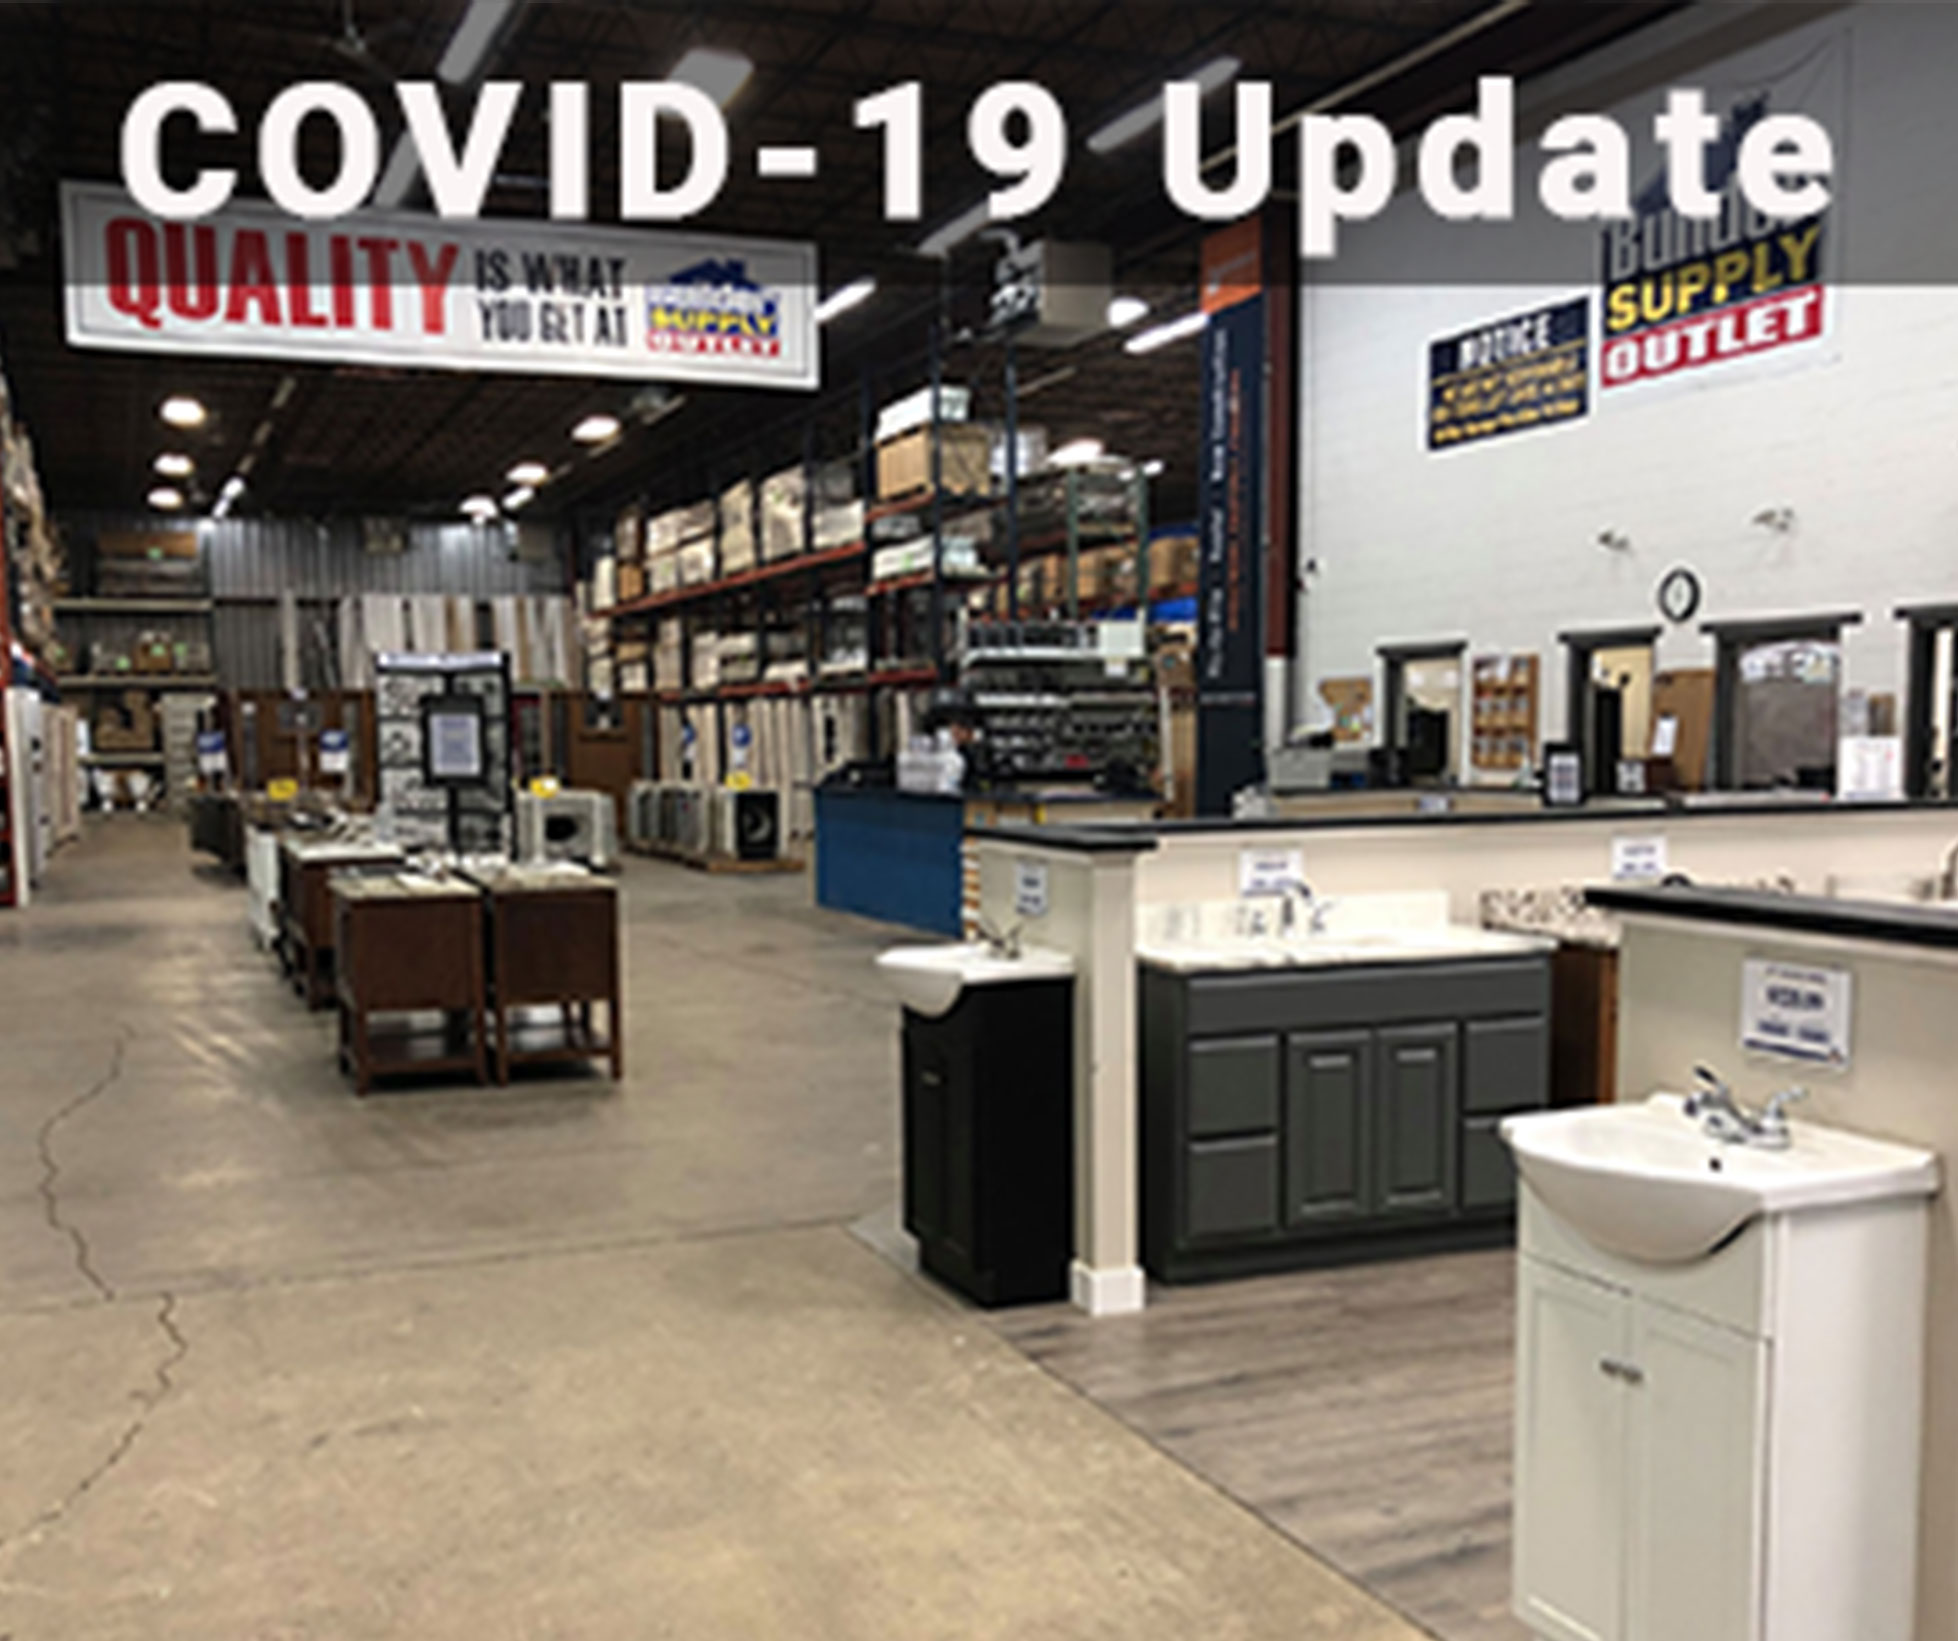 Update on COVID-19 and BSO